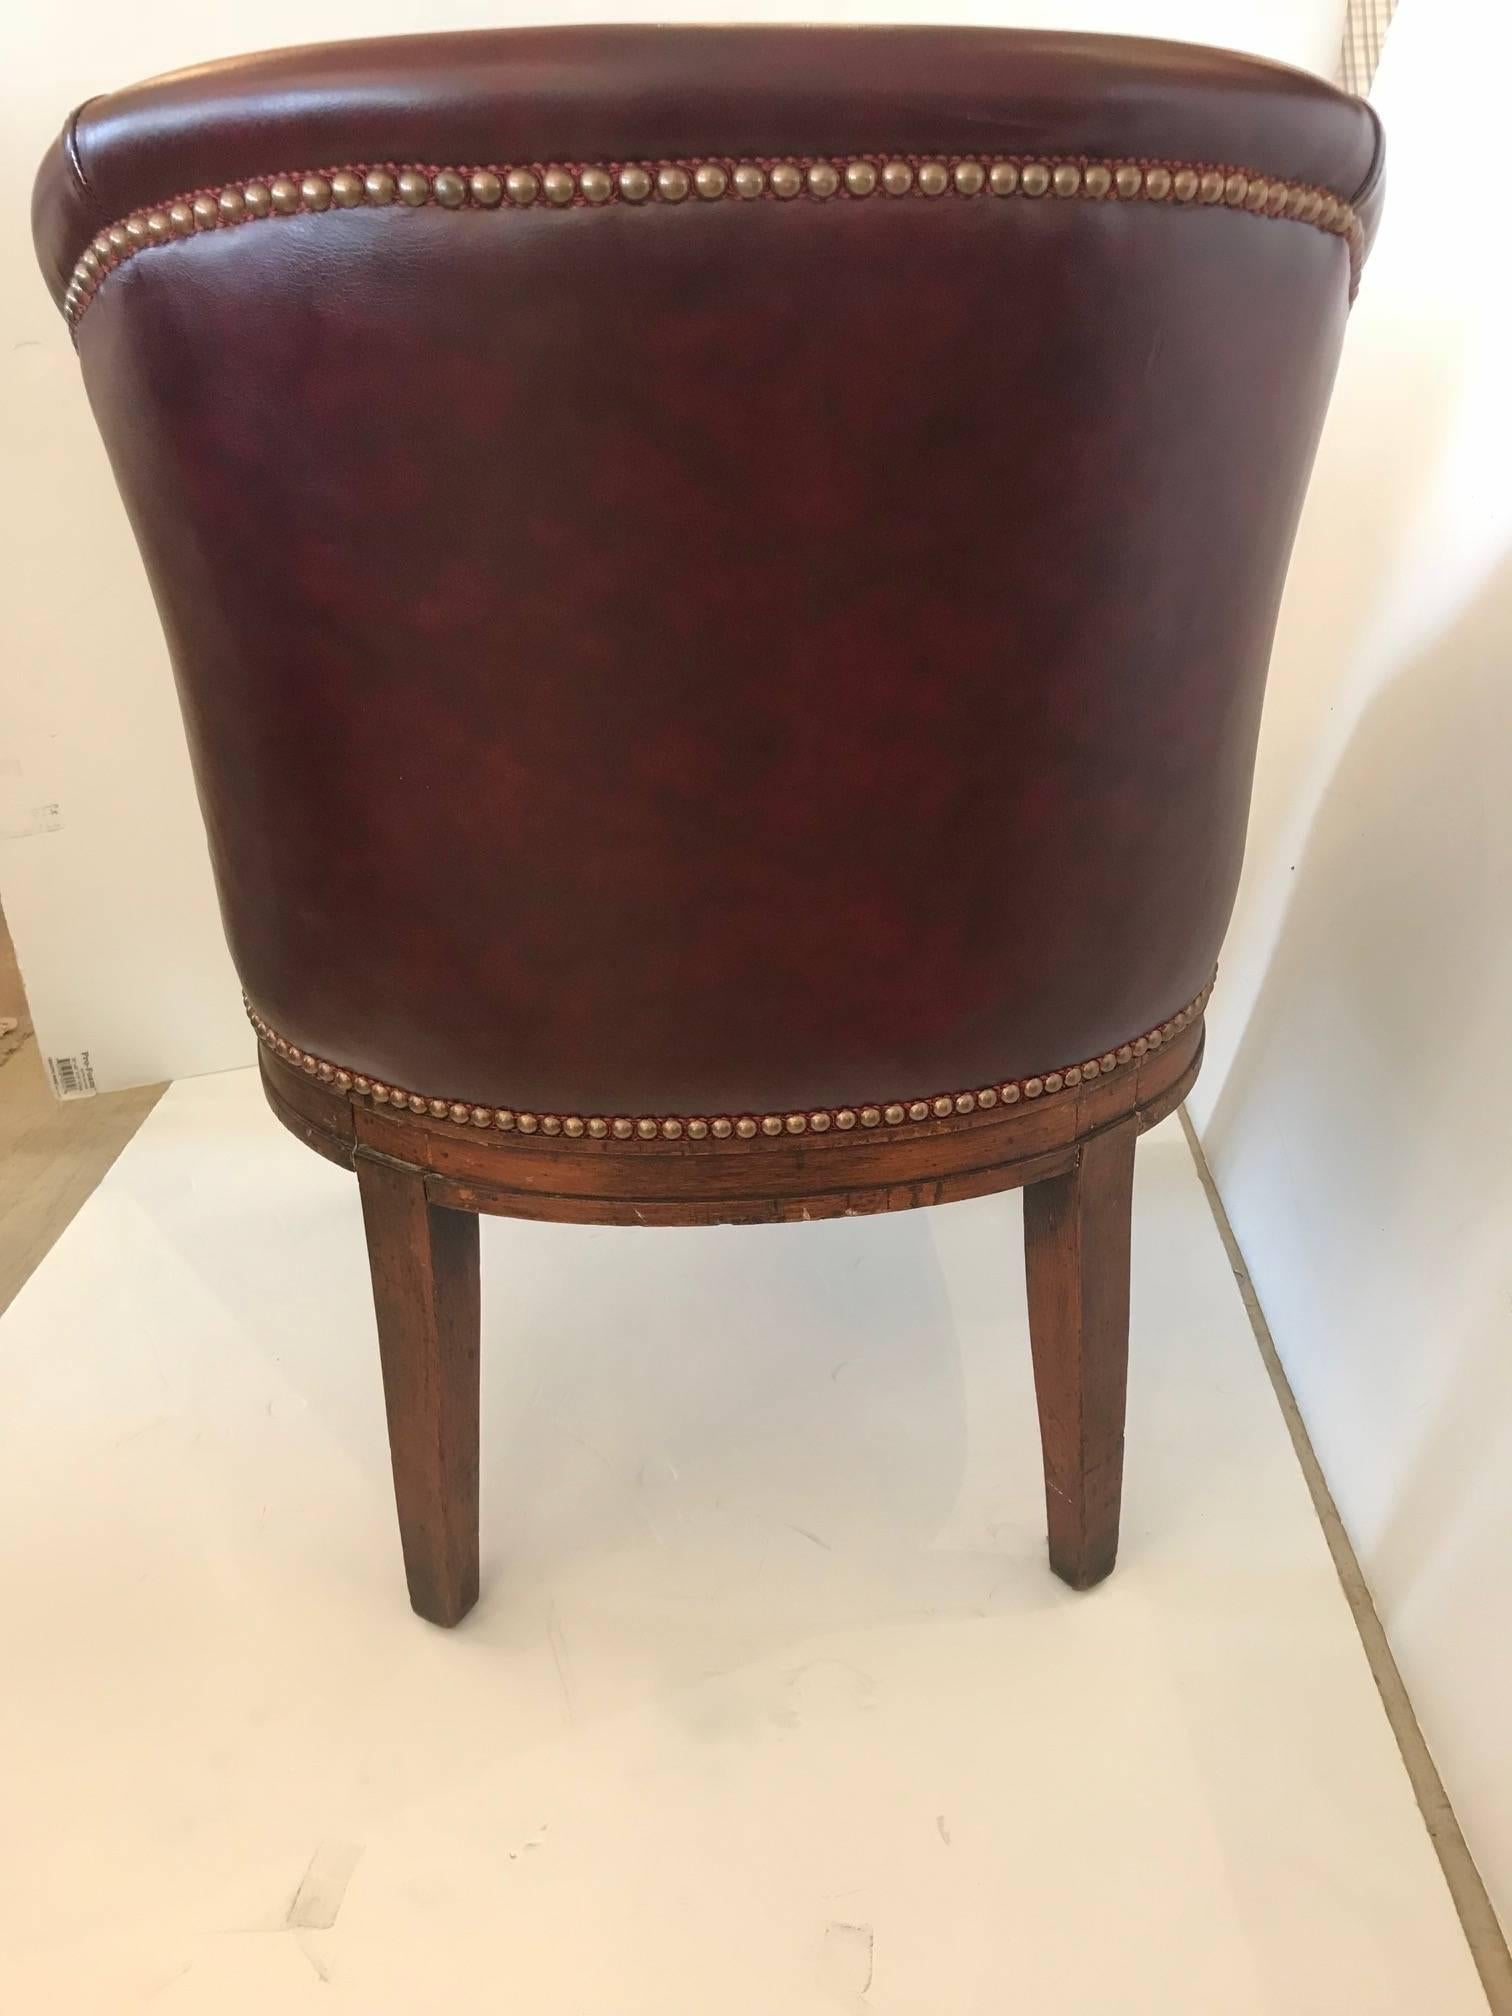 Very handsome English barrel shaped tub chair newly covered in rich burgundy leather and finished with brass nailheads.
Measure: Seat 20 D x 17.5 H.

 